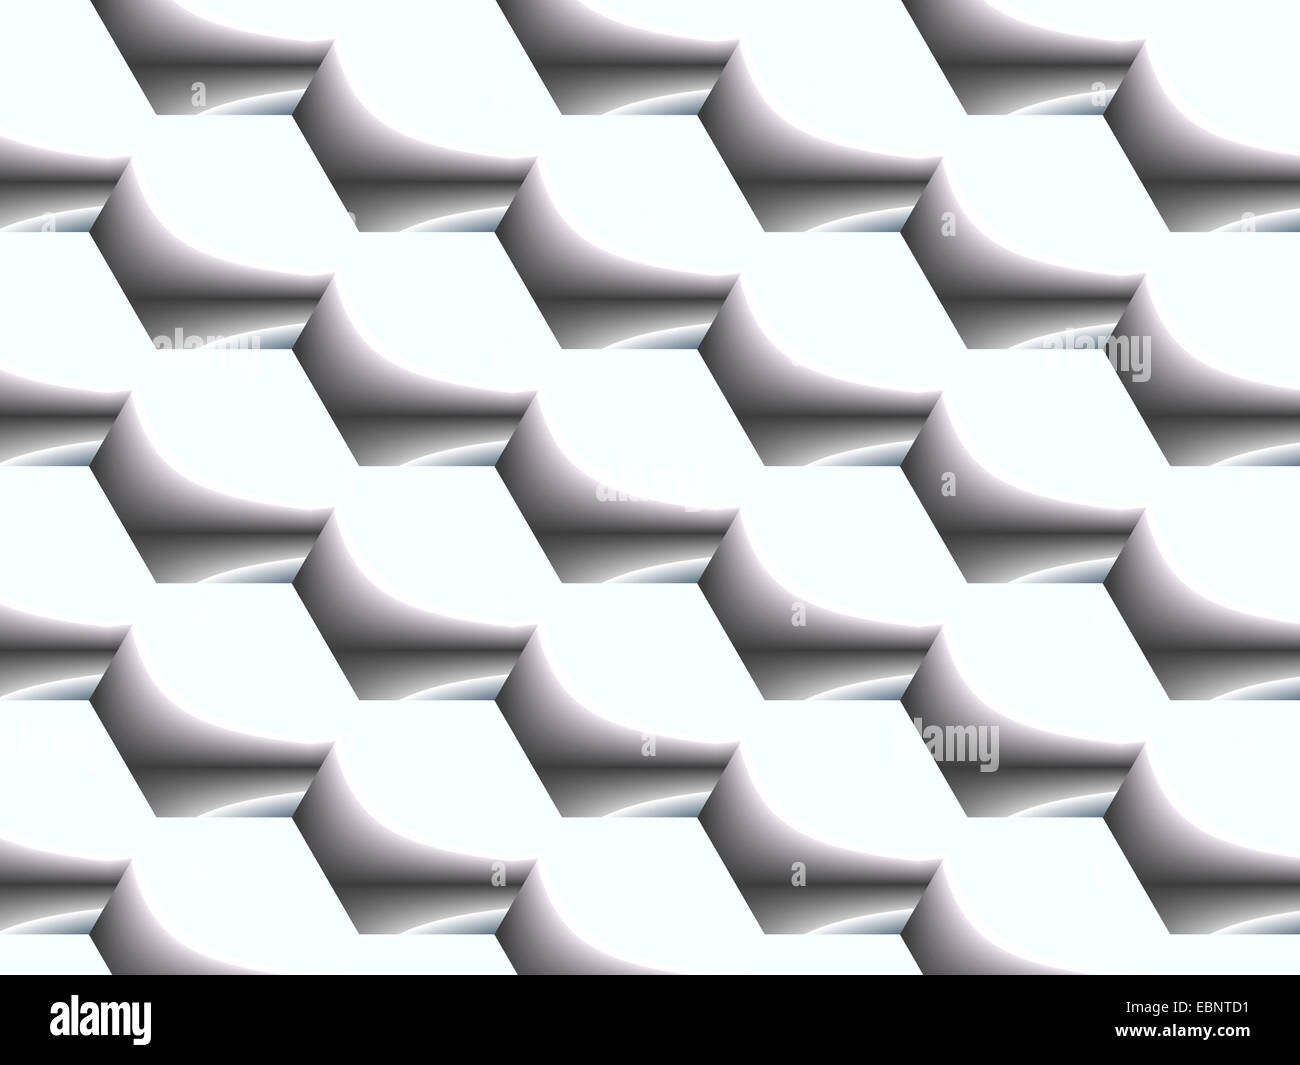 Abstract background decorative modern white button pattern Stock Photo